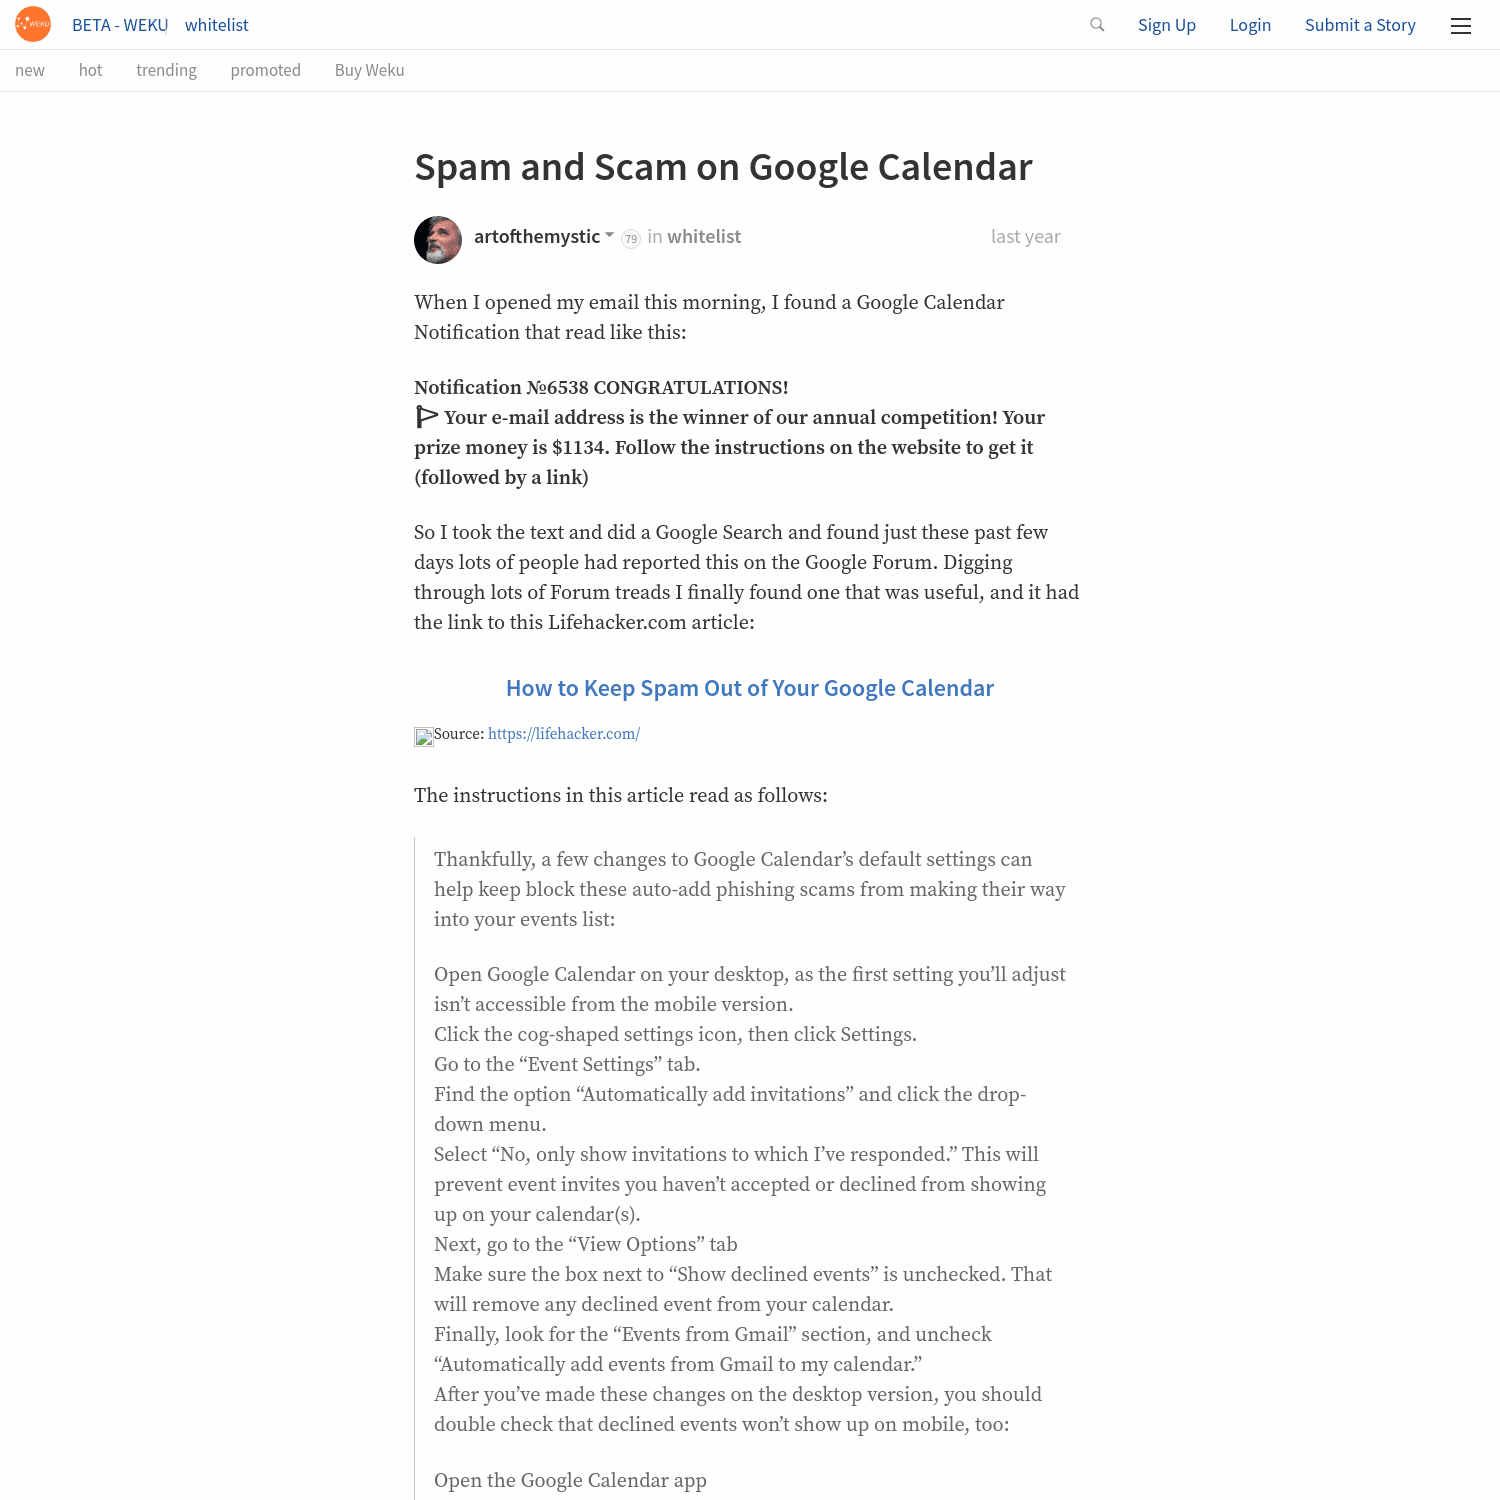 Spam and Scam on Google Calendar